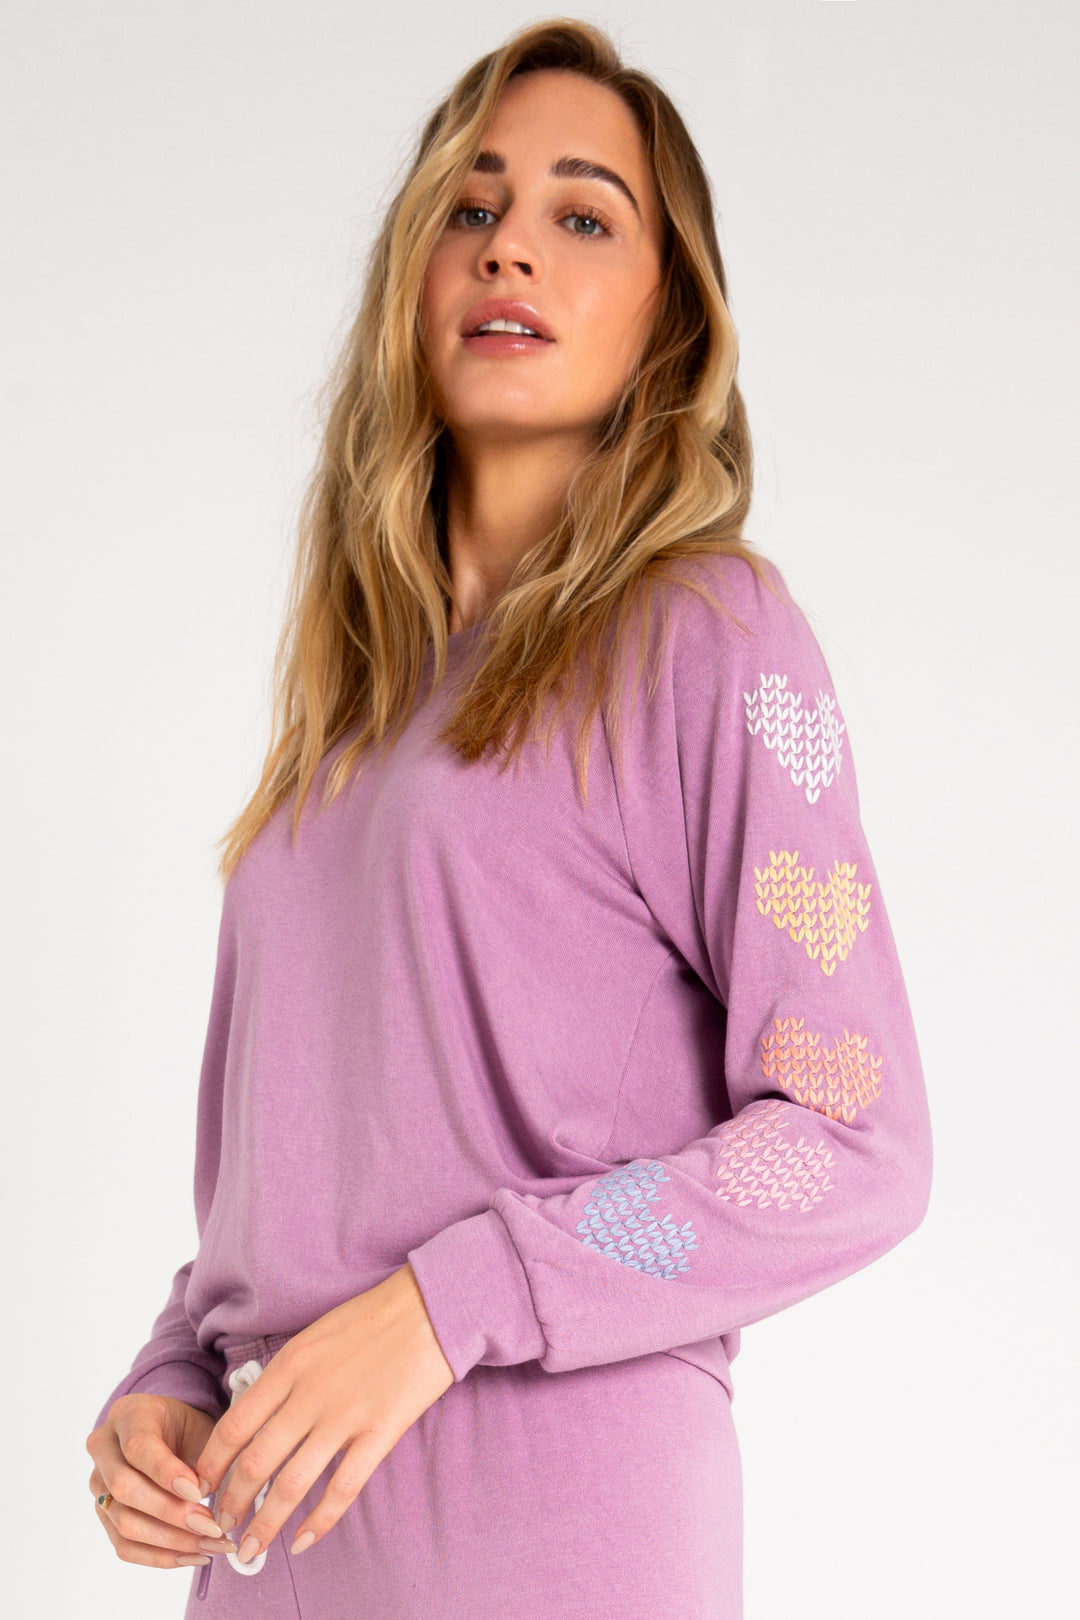 Fleece pullover top in mauve with multi-color heart printed on sleeves. (7231877677156)